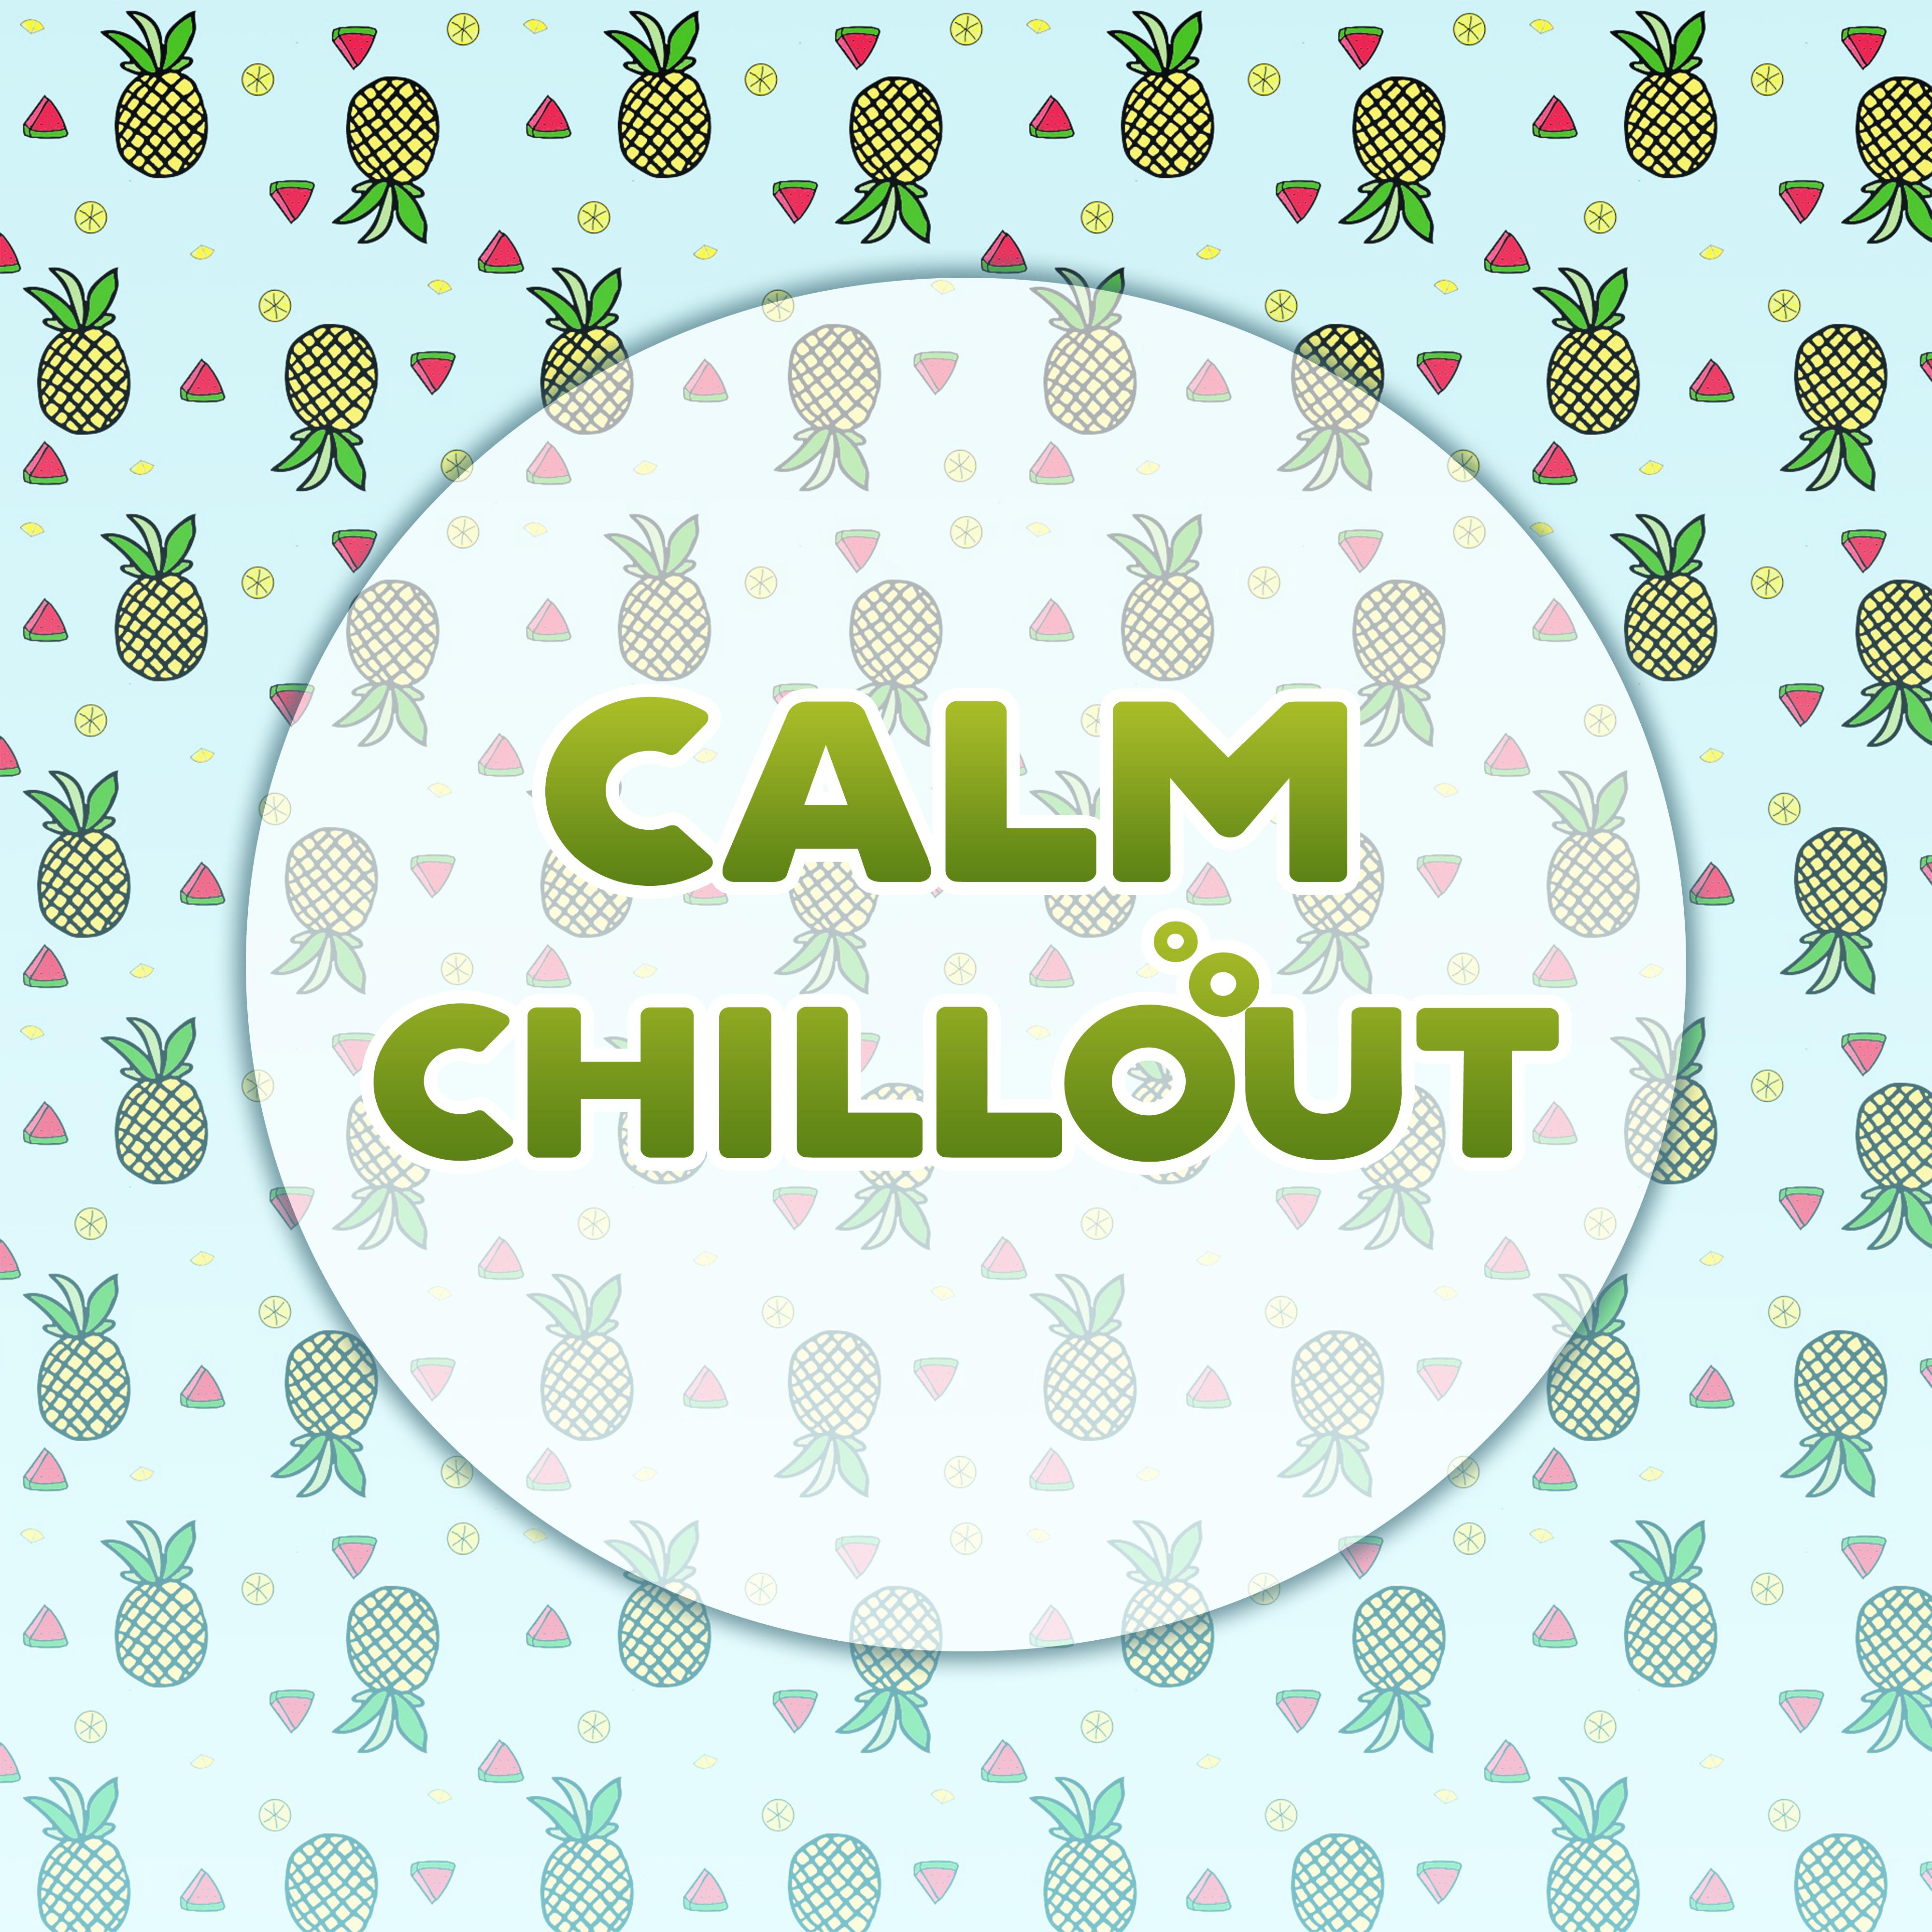 Calm Chillout – Relax & Chill , Smooth Chillout Vibrations, Café Music, Chill Out 2017